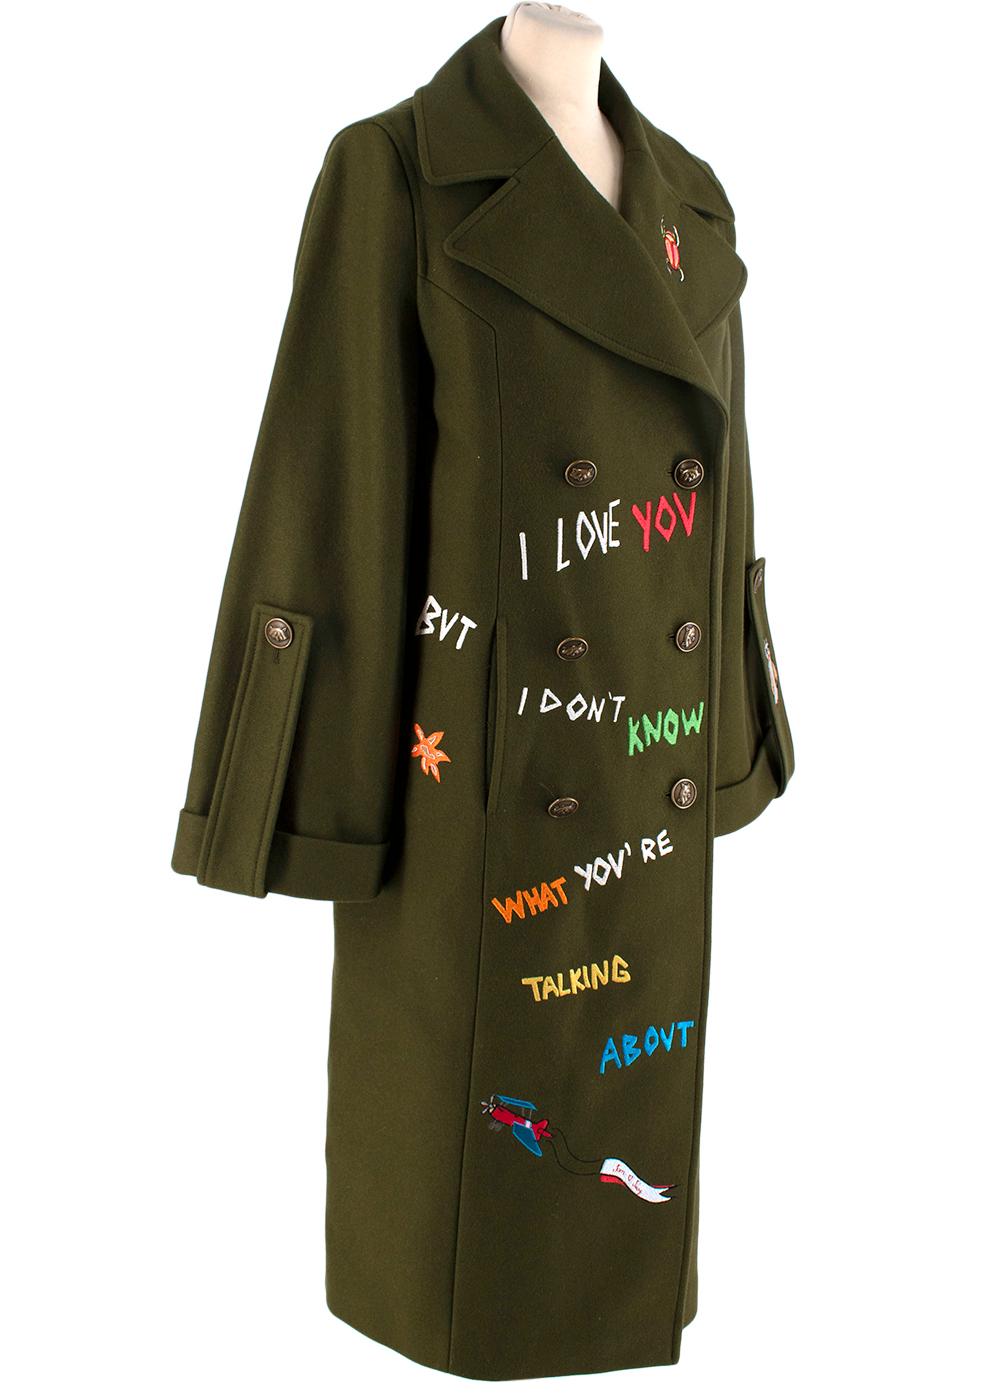 Mira Mikati Khaki Wool Blend Military Embroidered Peacoat

- Khaki wool blend peacoat with playful all-over embroidery motifs
- Boxy fit, large lapels, and military-style large button-up tabs on the cuffs
- Double-breasted design with two welt